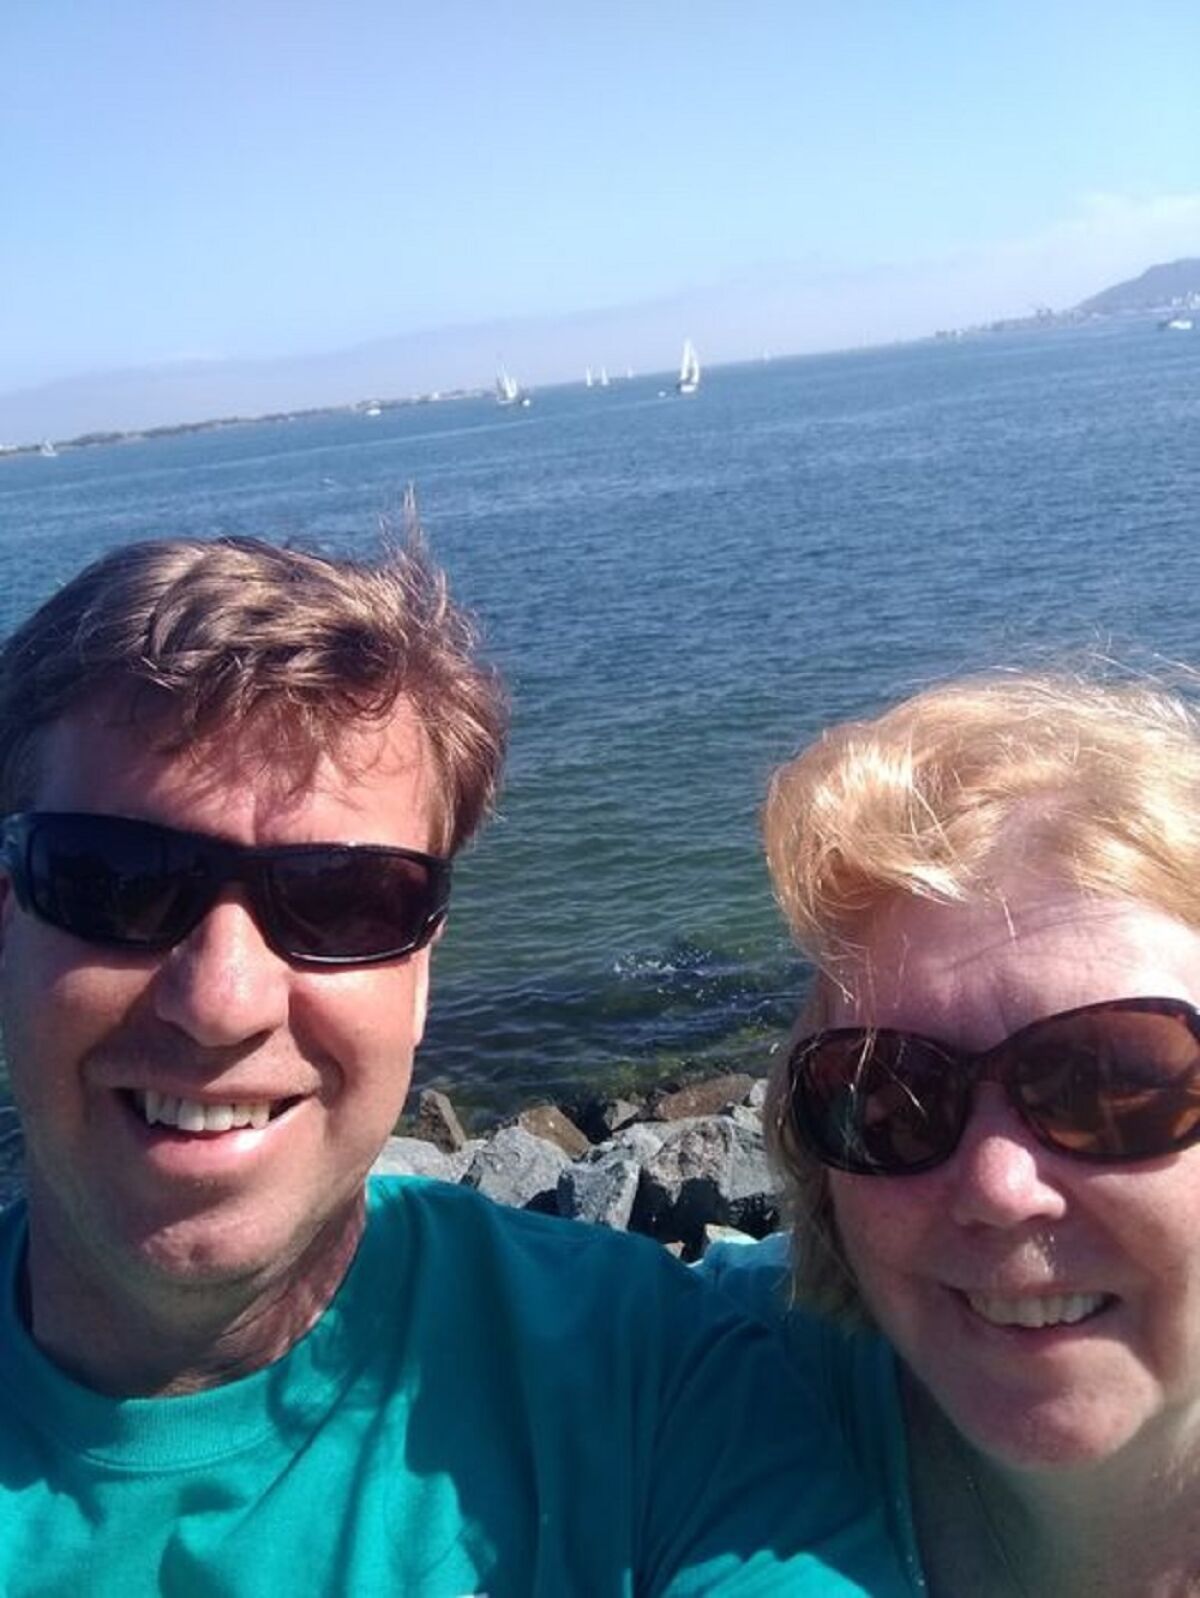 La Jolla resident Brian Cluster is pictured with his mother, Bev Boyett.